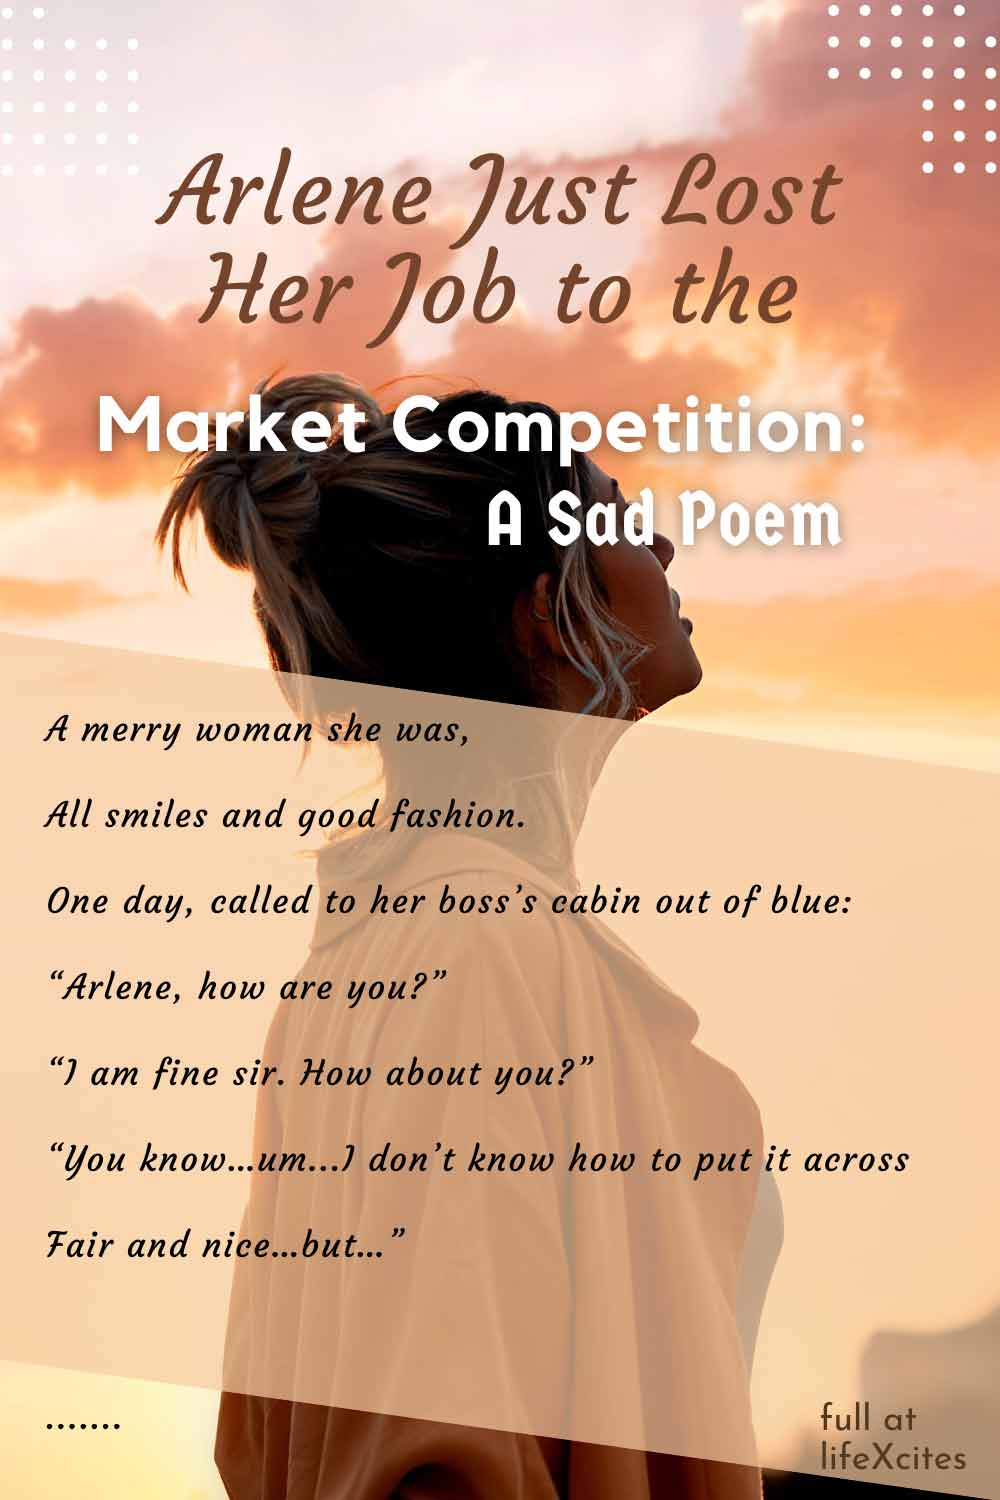 Arlene-Just-Lost-Her-Job-to-the-Market-Competition-A-Sad-Poem